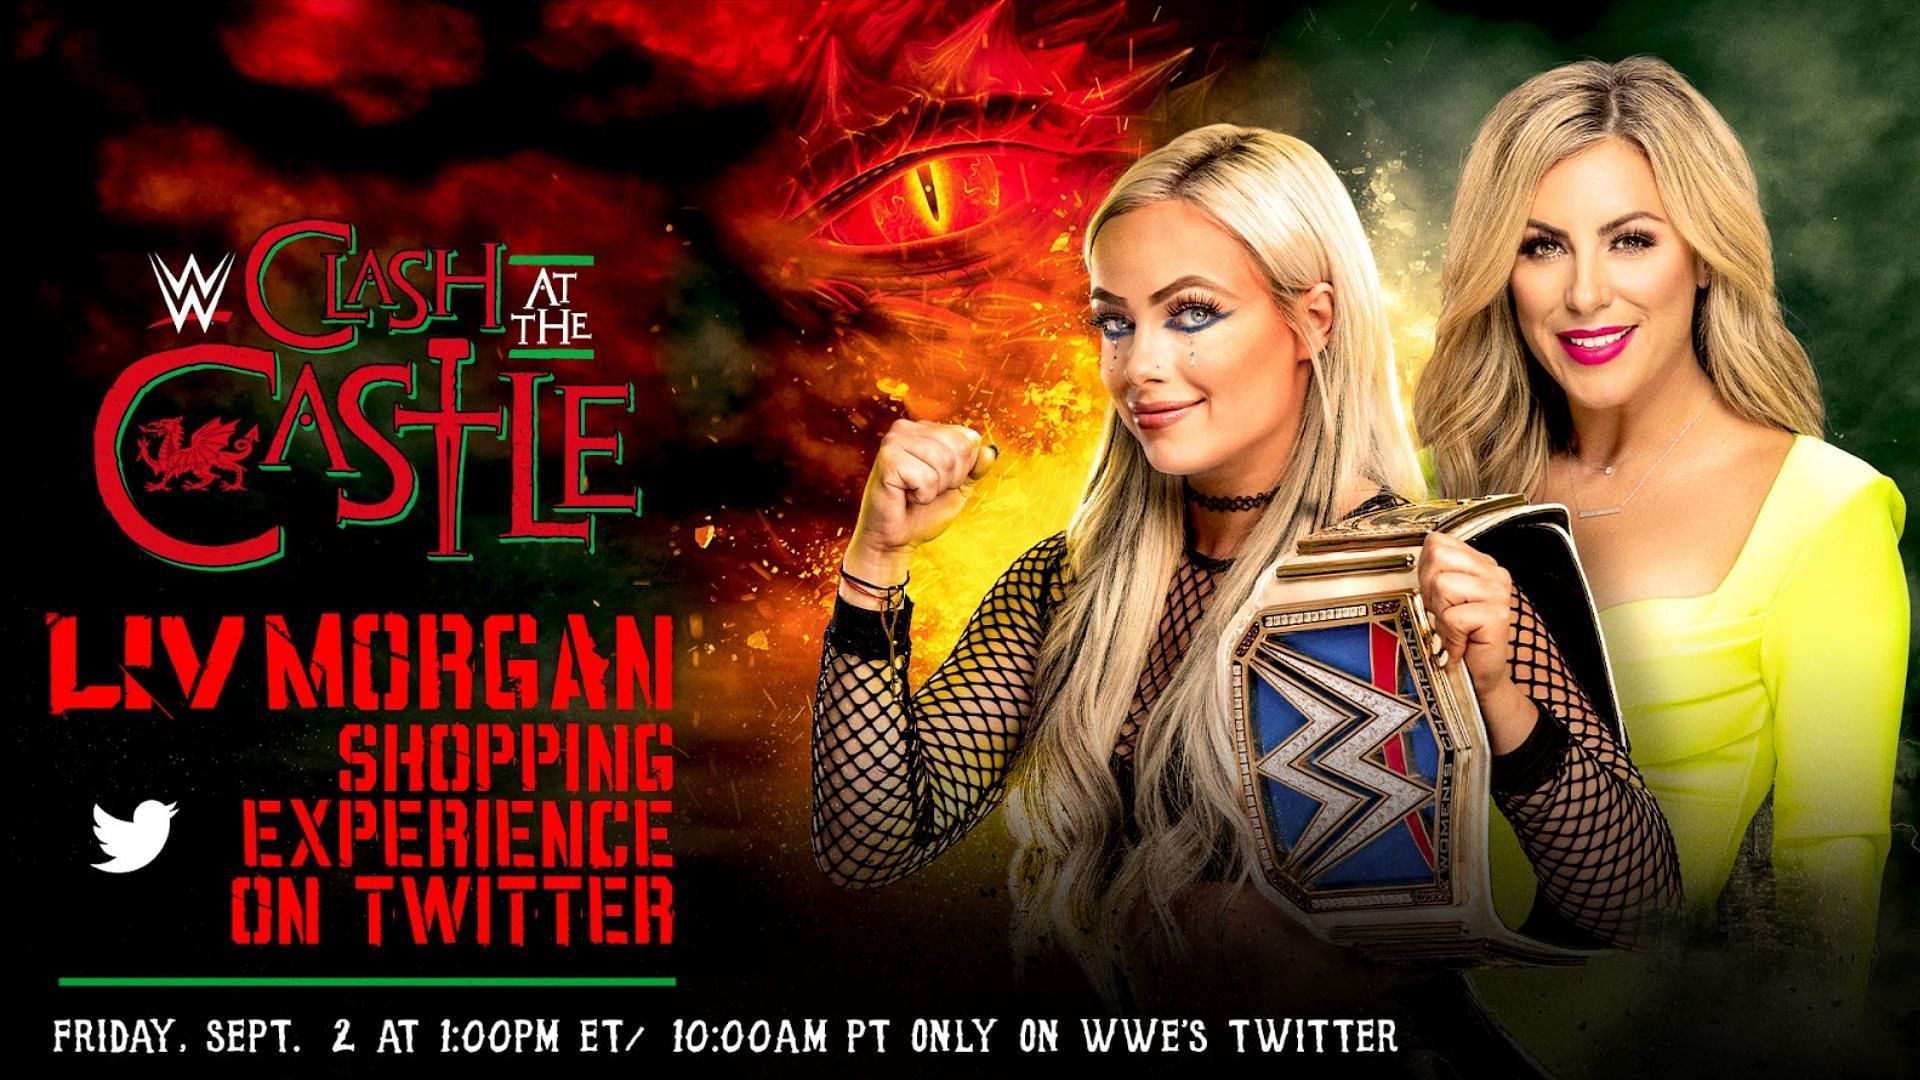 WWE will host their first-ever live shopping event on Twitter with Liv Morgan